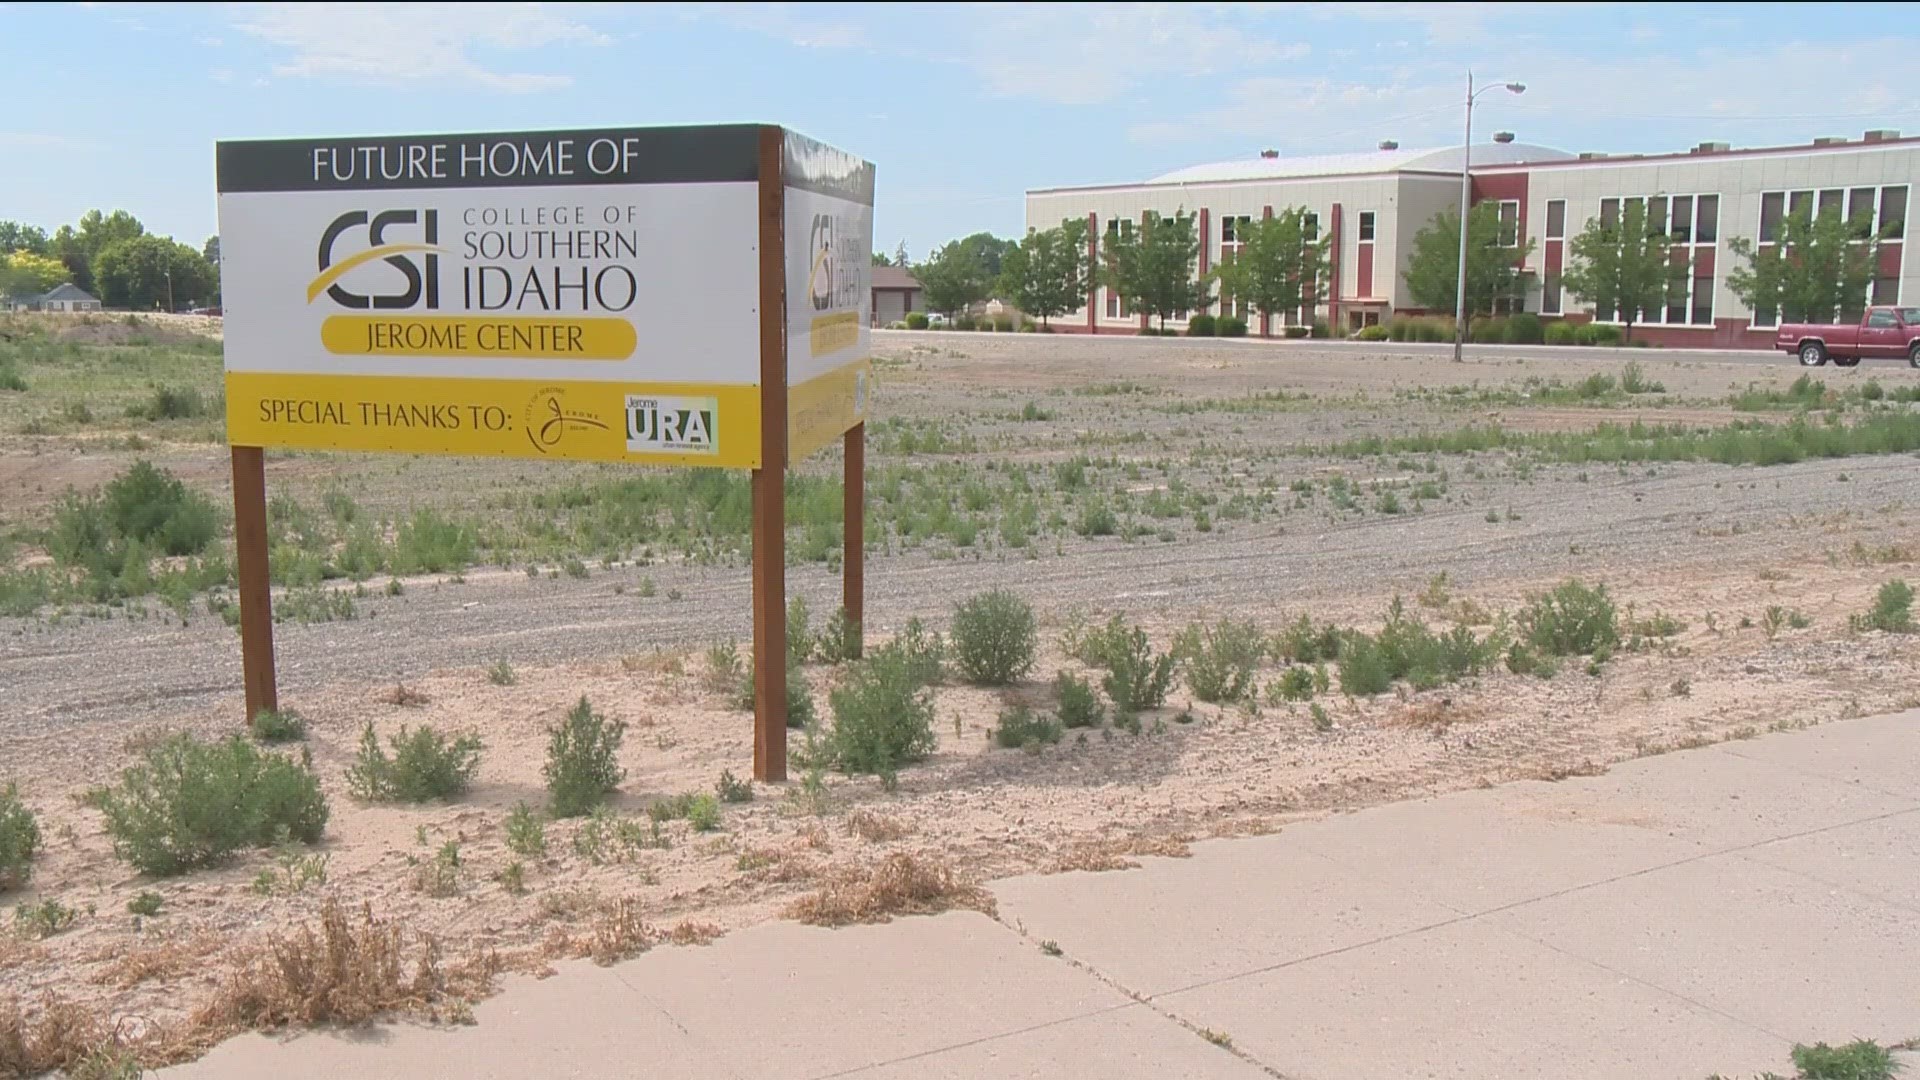 The Twin Falls-based school plans to build a new education and training center in Jerome.